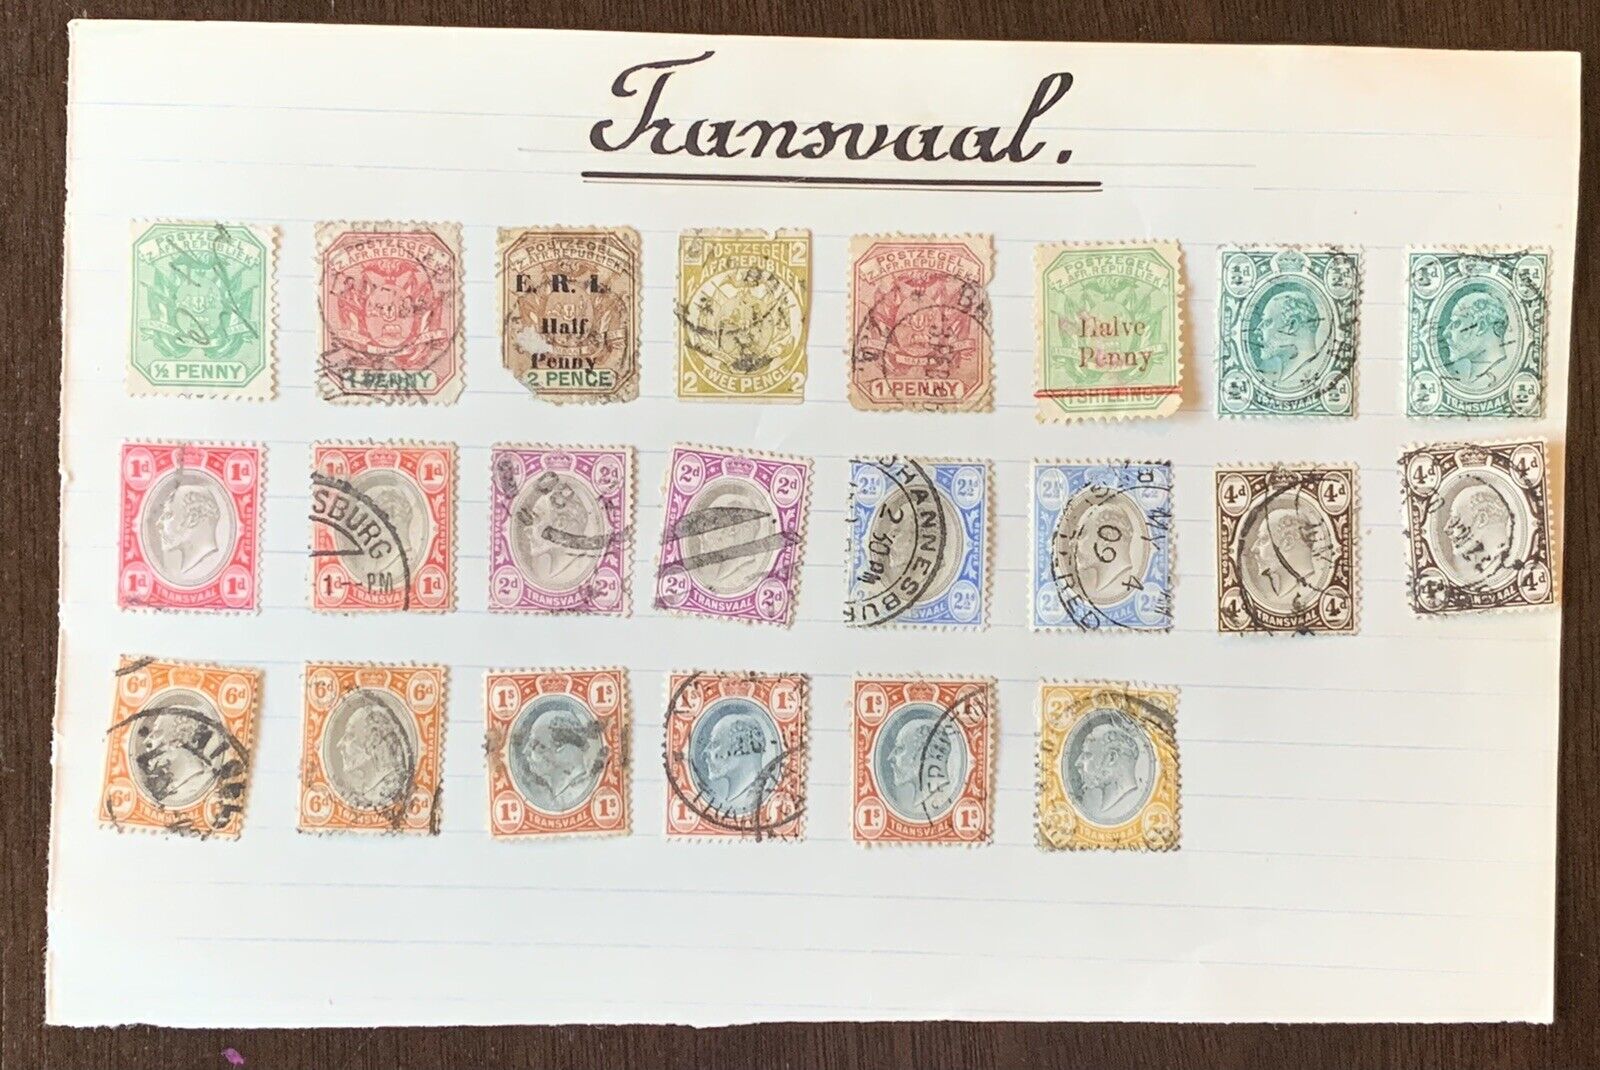 Early Transvaal Stamp Lot On Partial Page. E.r.i, King Edward, Overprint & More